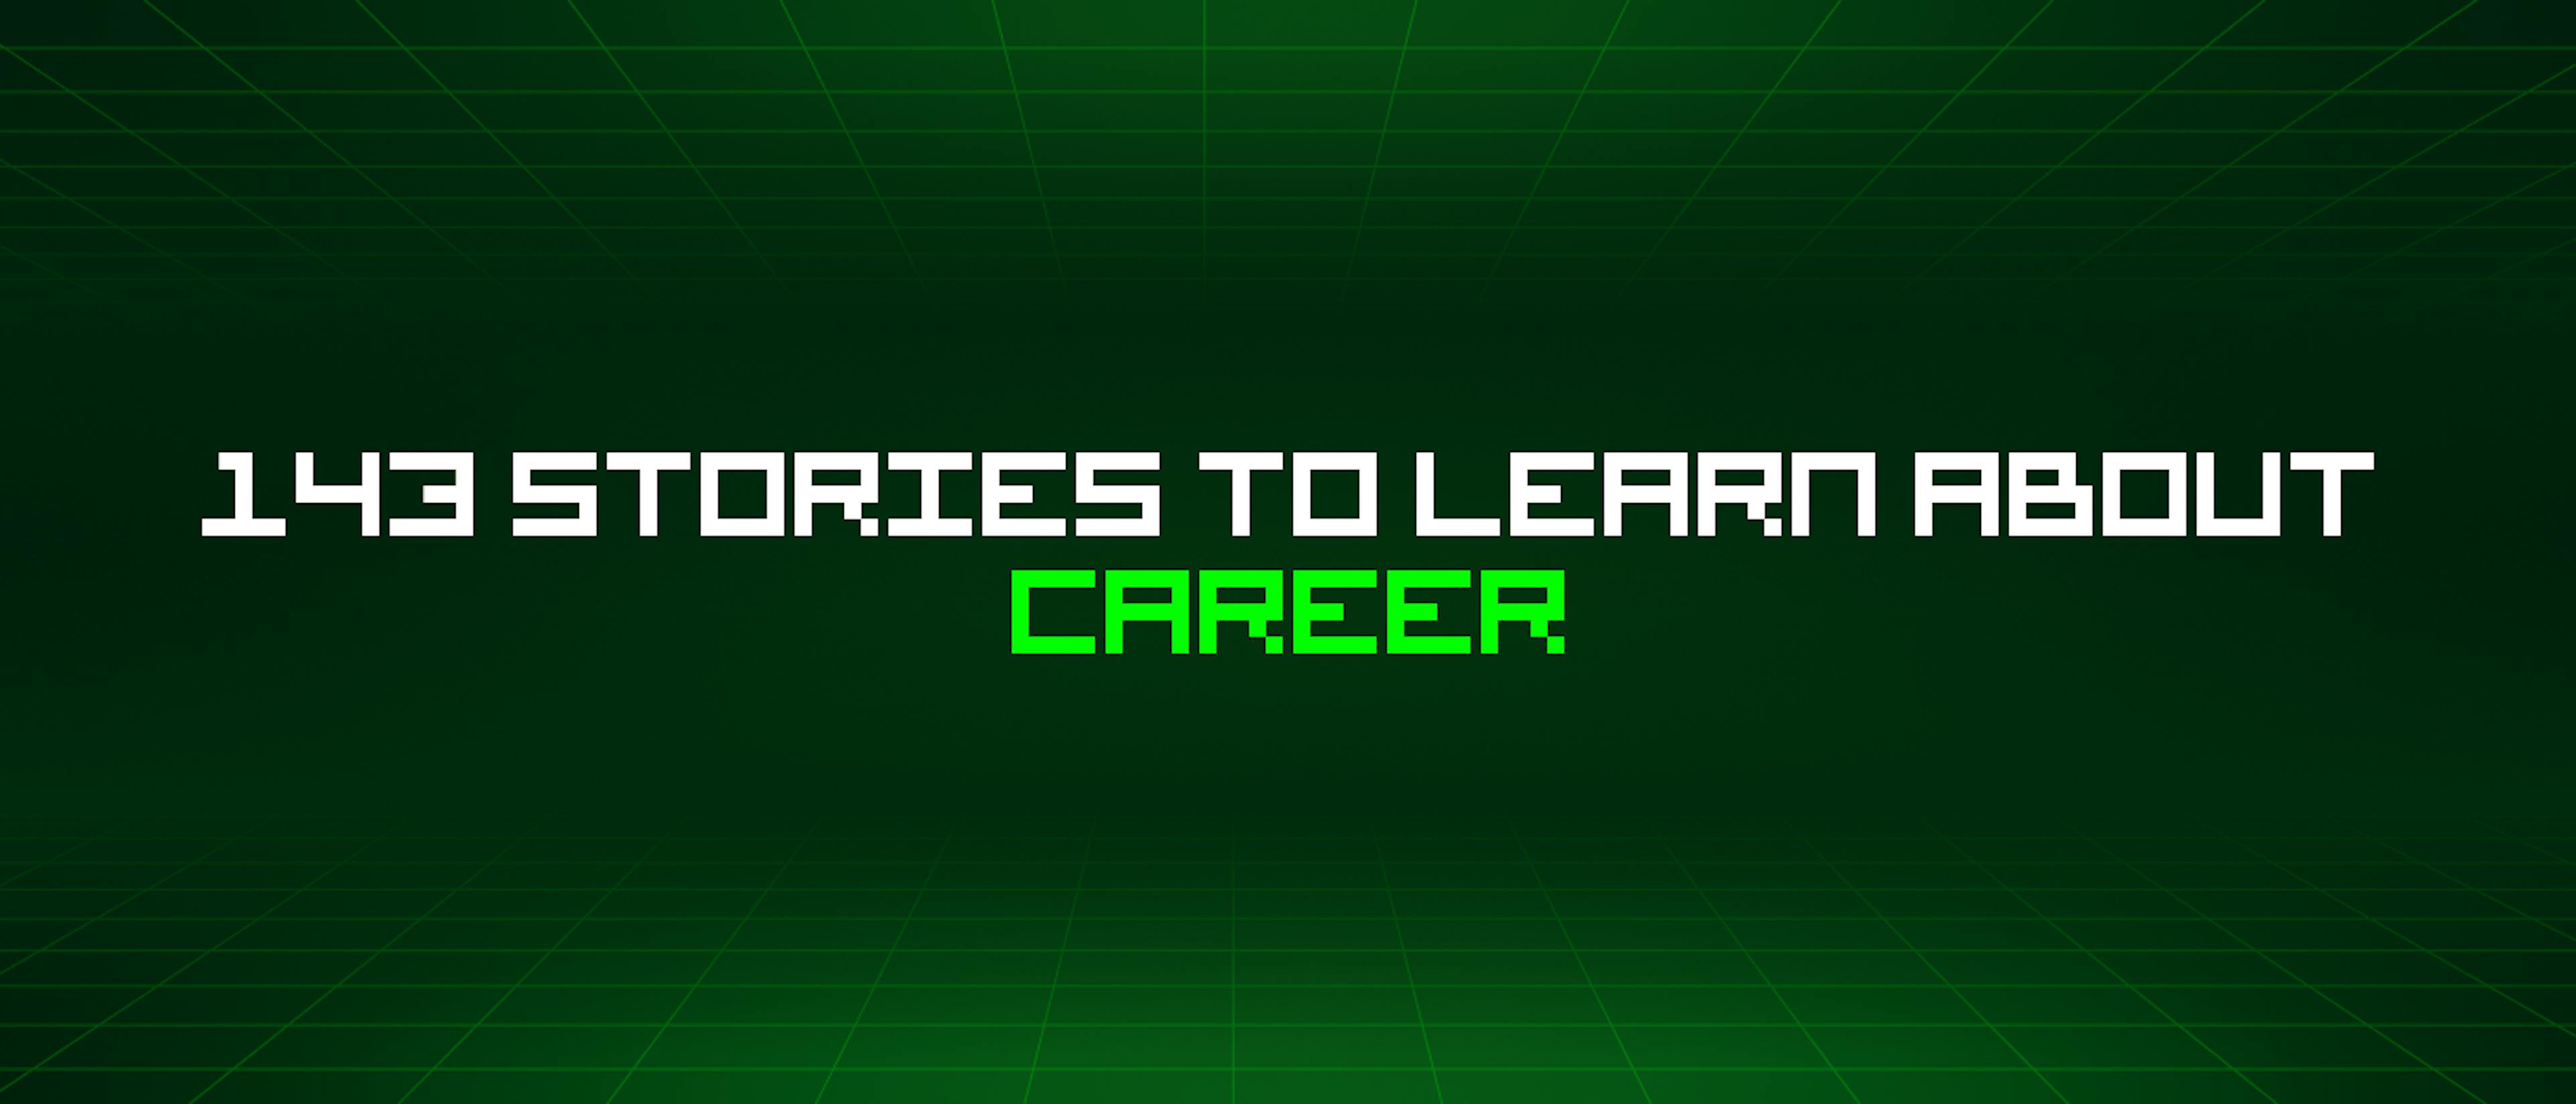 featured image - 143 Stories To Learn About Career